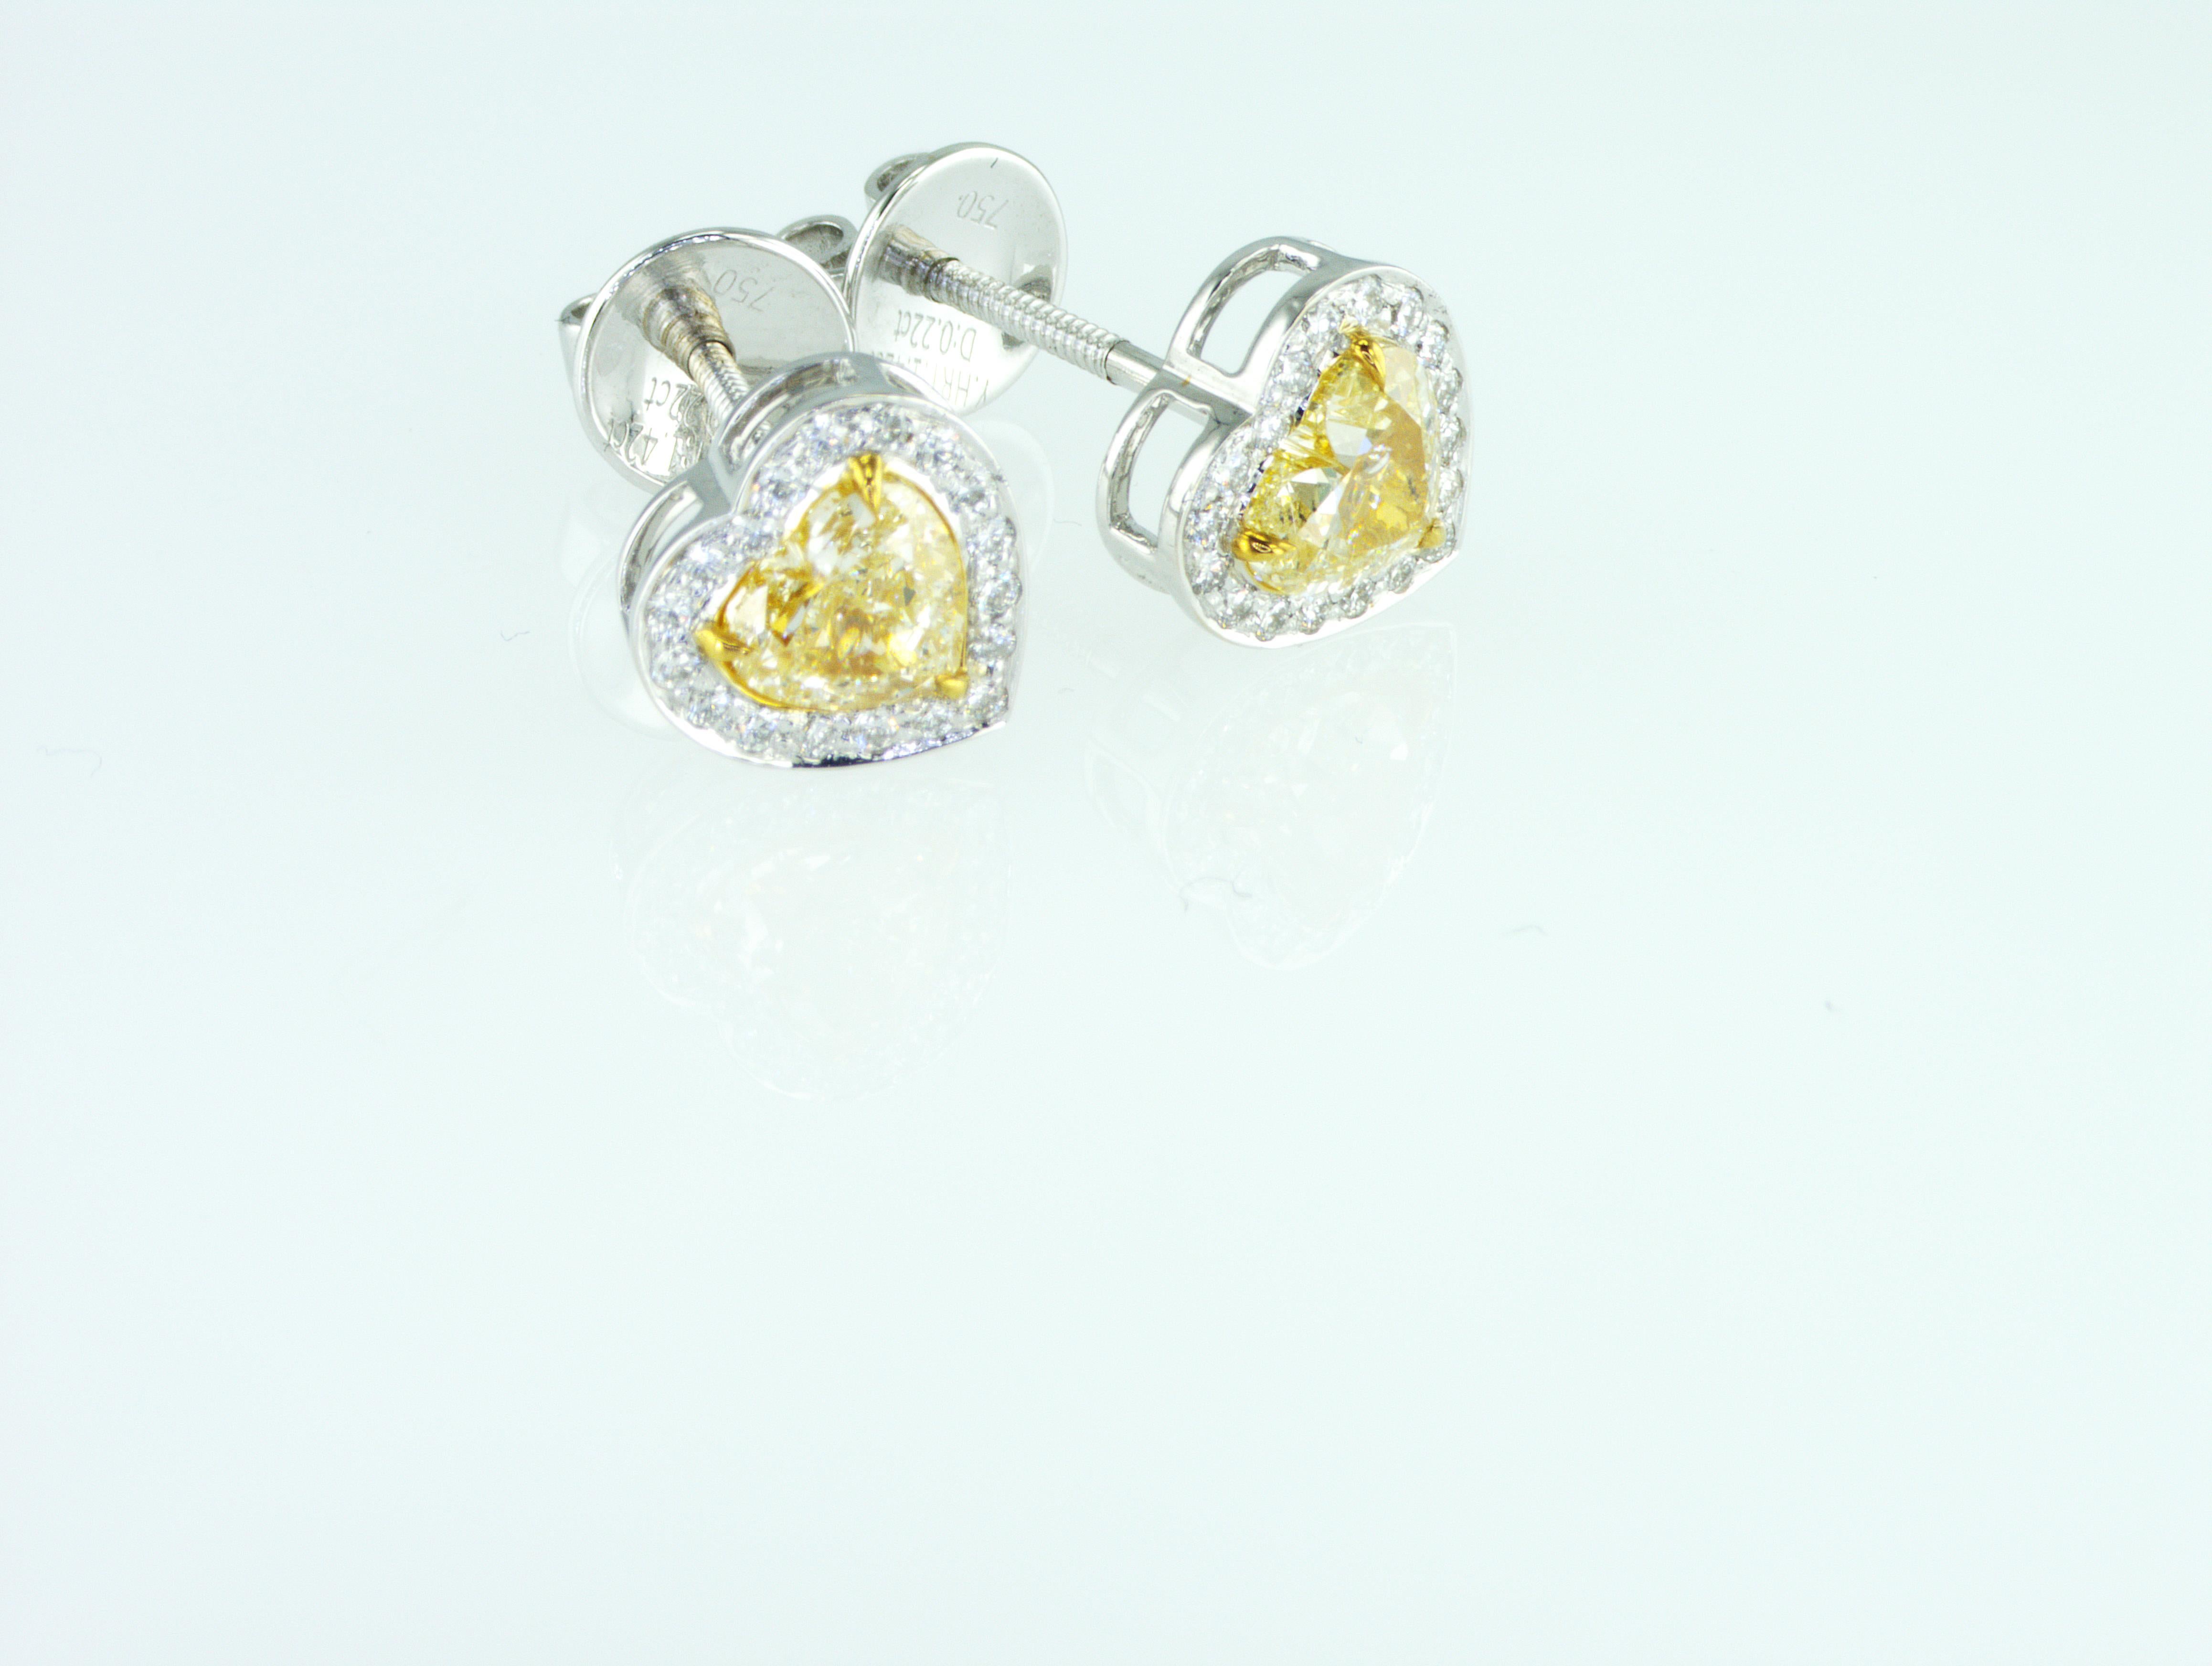 We are natural diamond production company located in Dubai.
Rare 1.66 carat Fancy Yellow Heart shape natural diamonds Earrings. 
Total weight of natural diamonds is 1.66 carat. All our diamonds, jewelry and gemstones are certified by well known